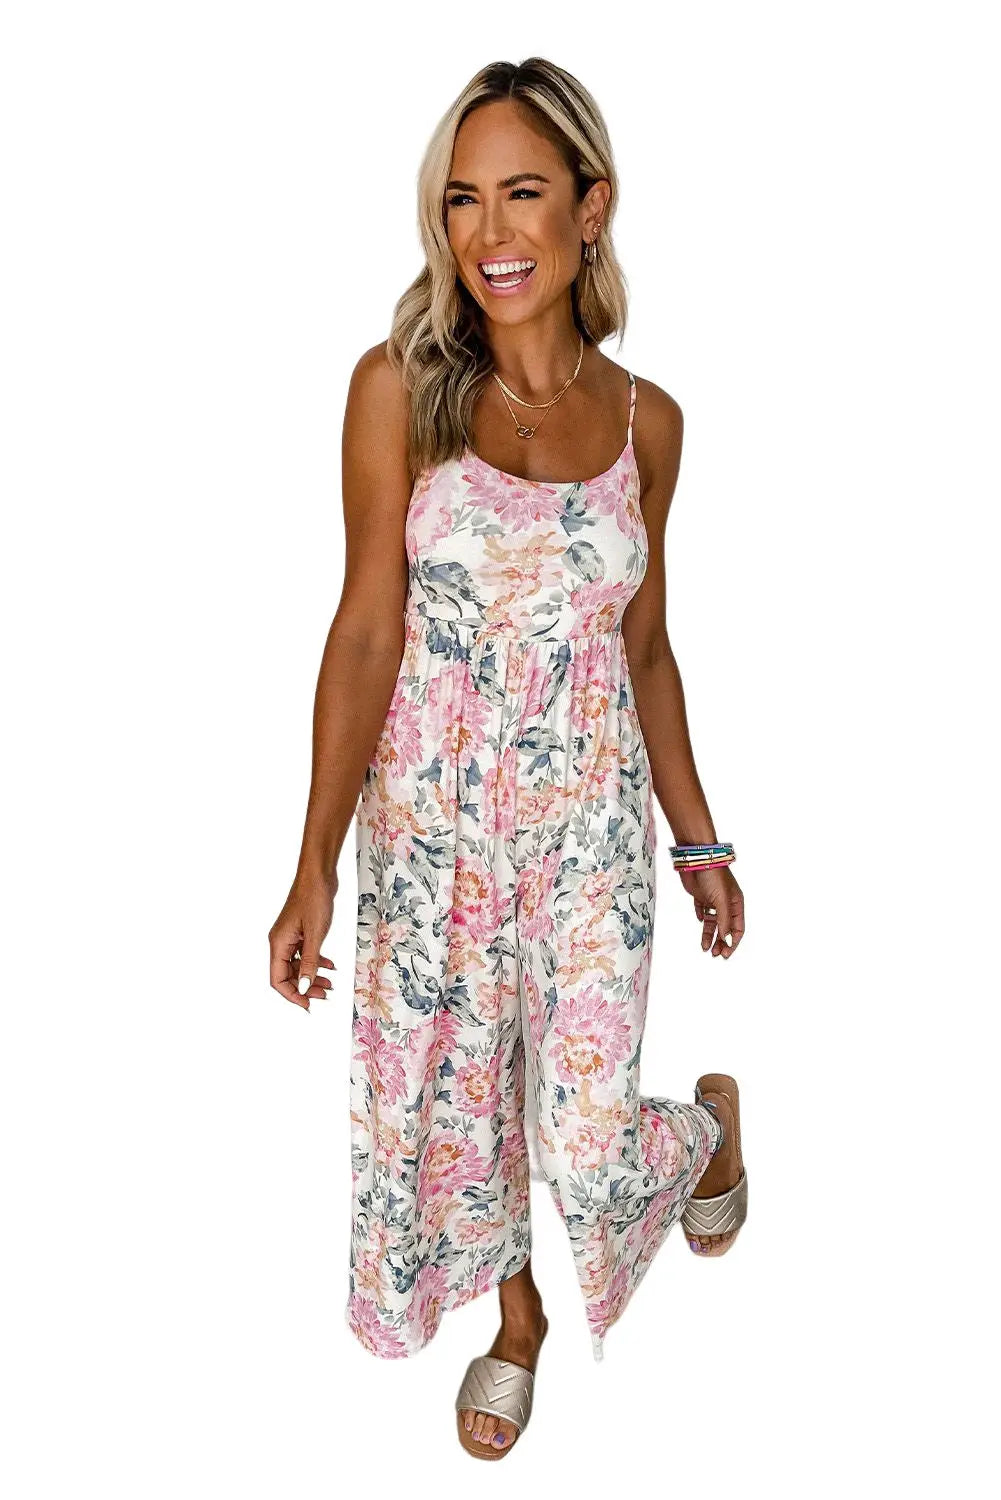 White floral spaghetti straps wide leg jumpsuit - jumpsuits & rompers